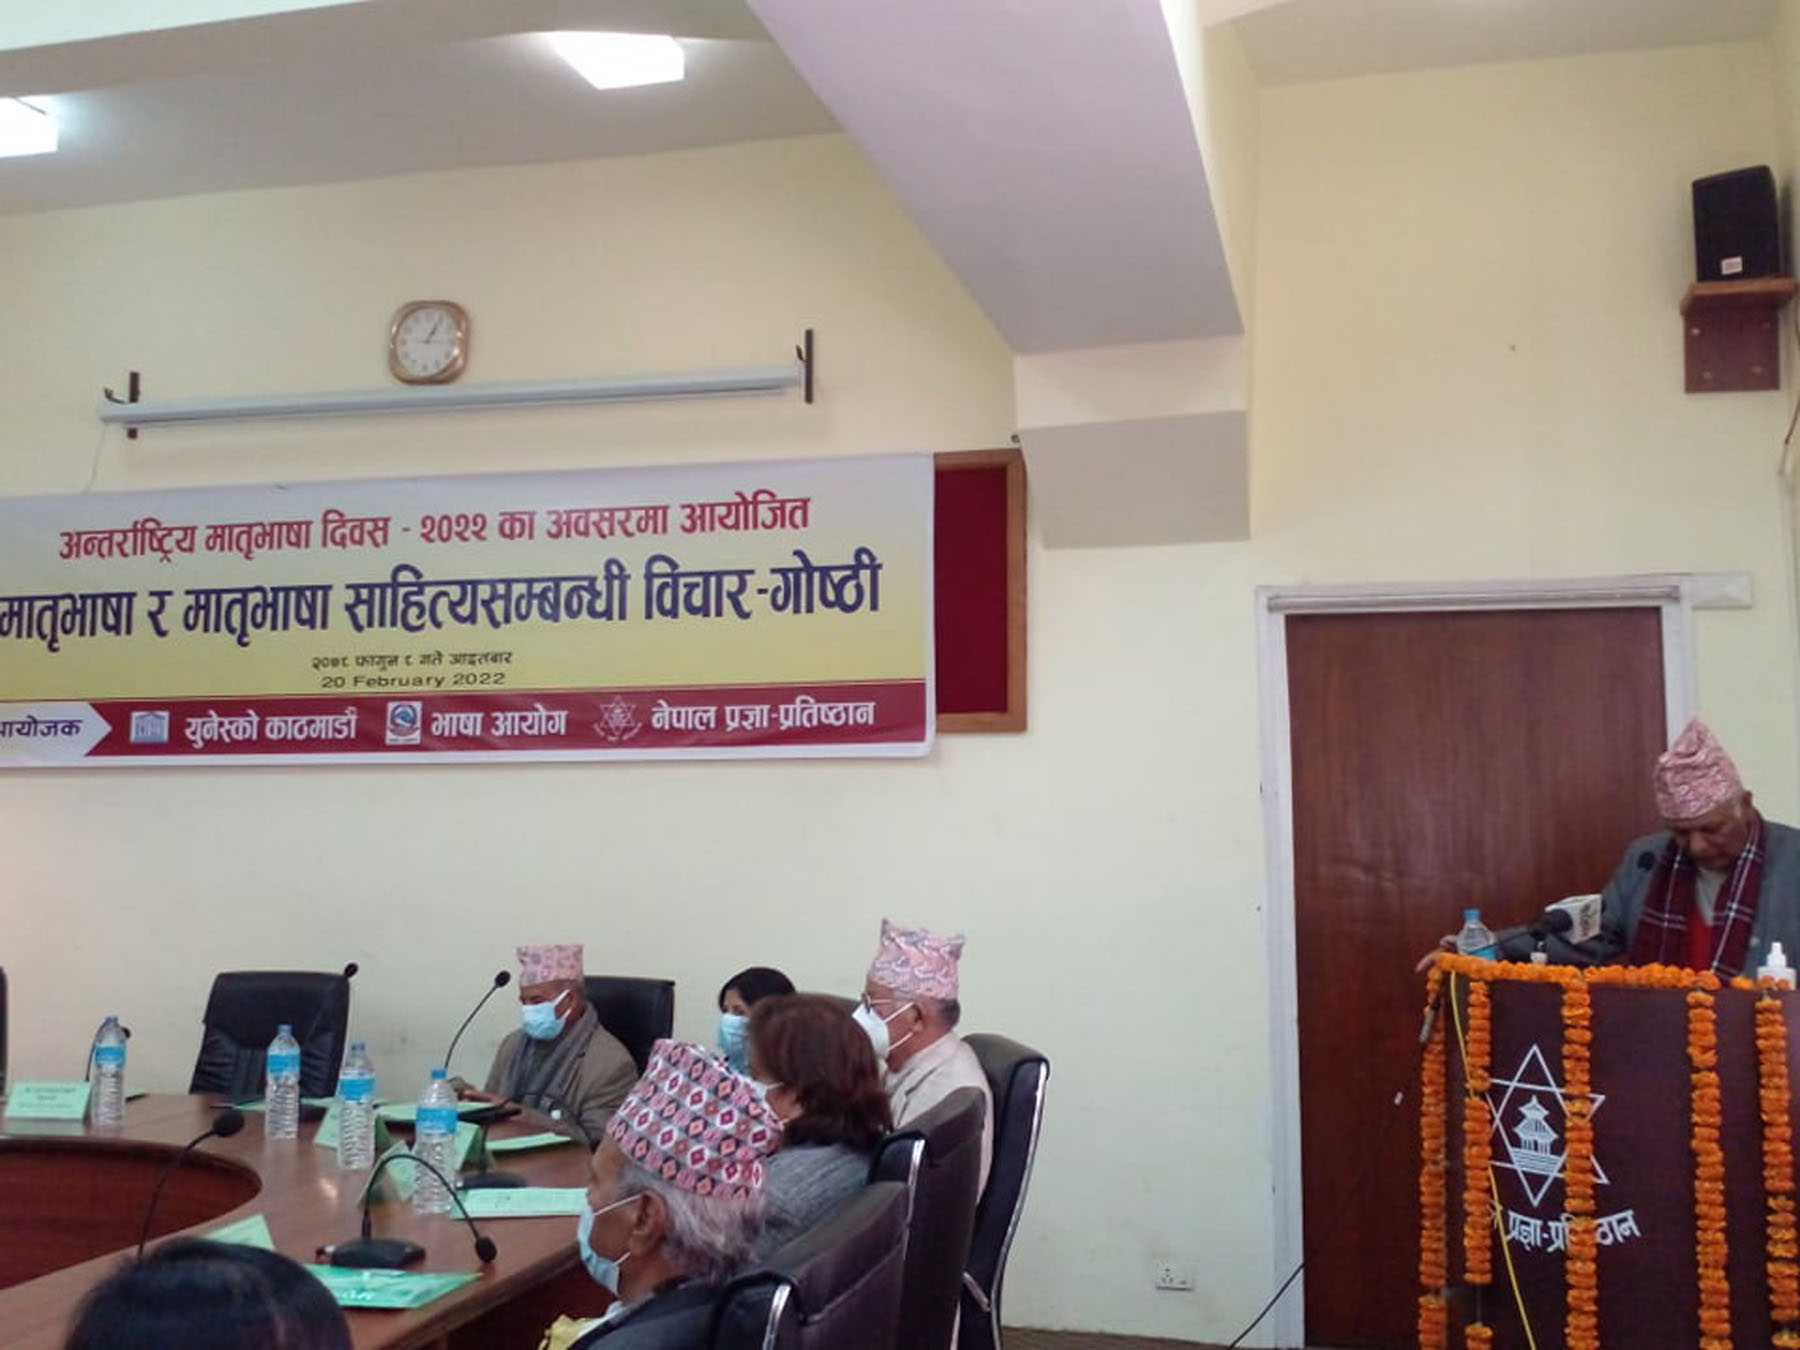 37-languages-on-verge-of-extinction-in-nepal-being-preserved